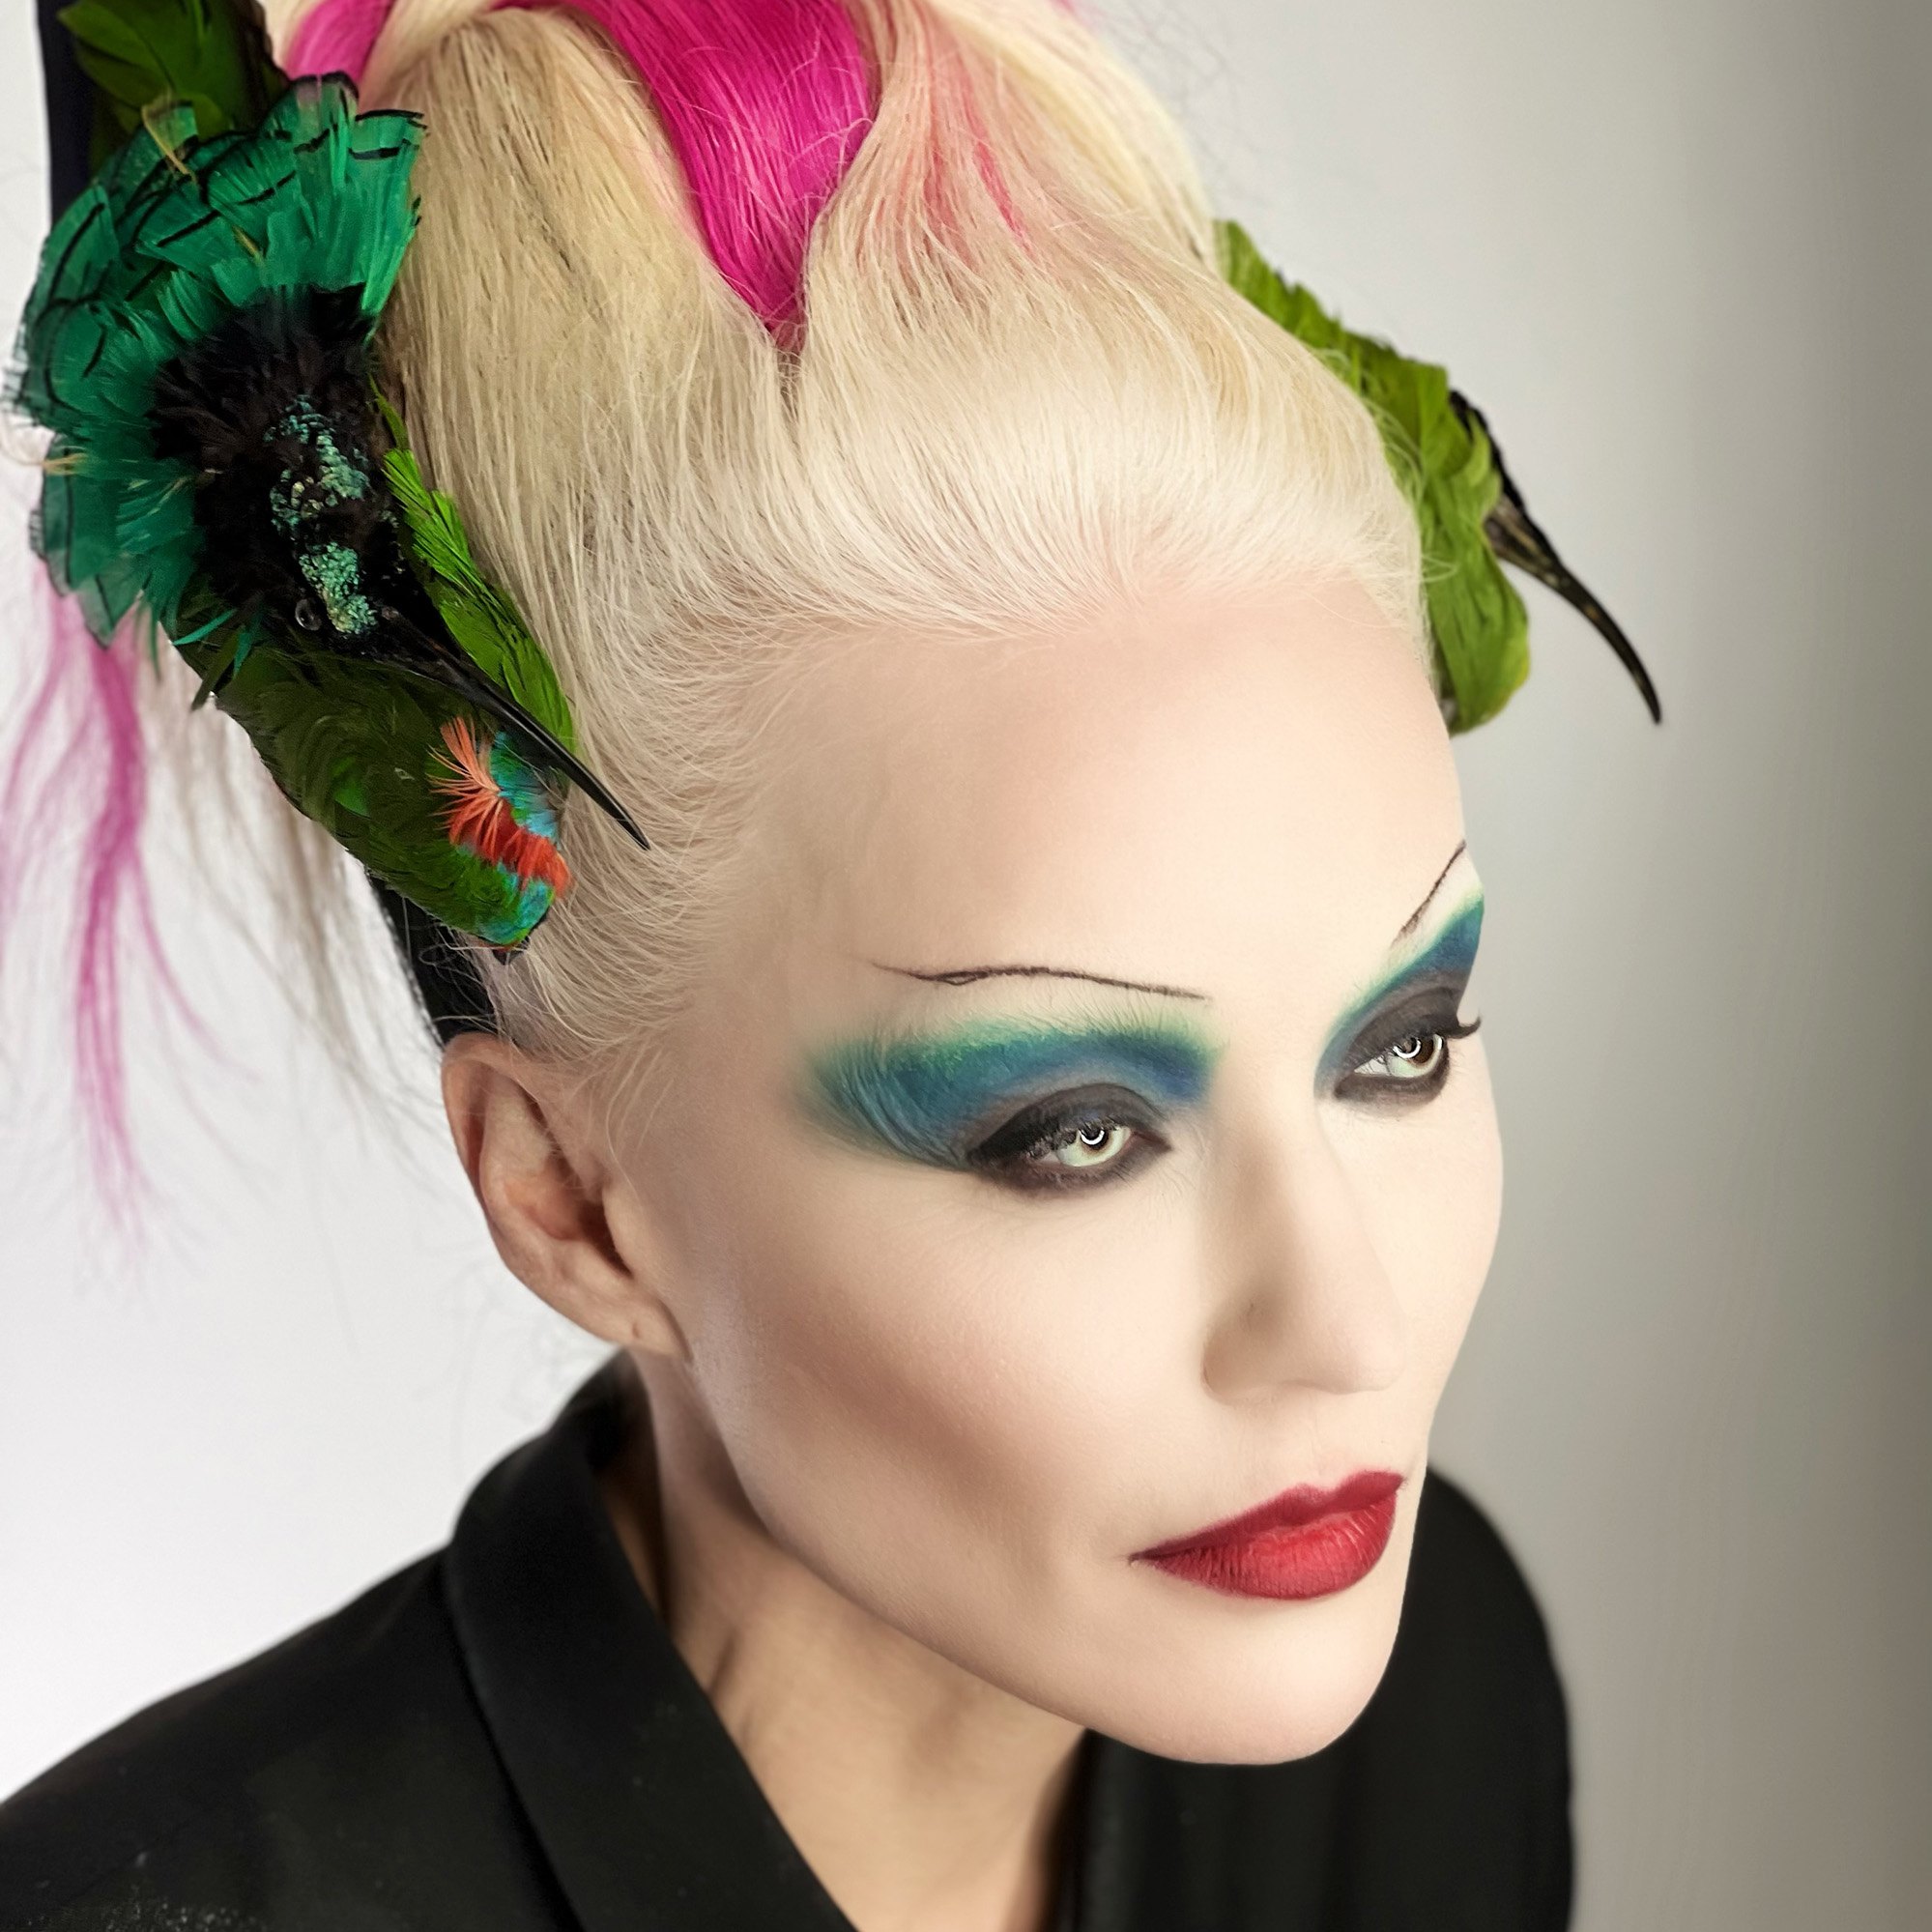 Daphne Guinness: “Everything is About Taste”